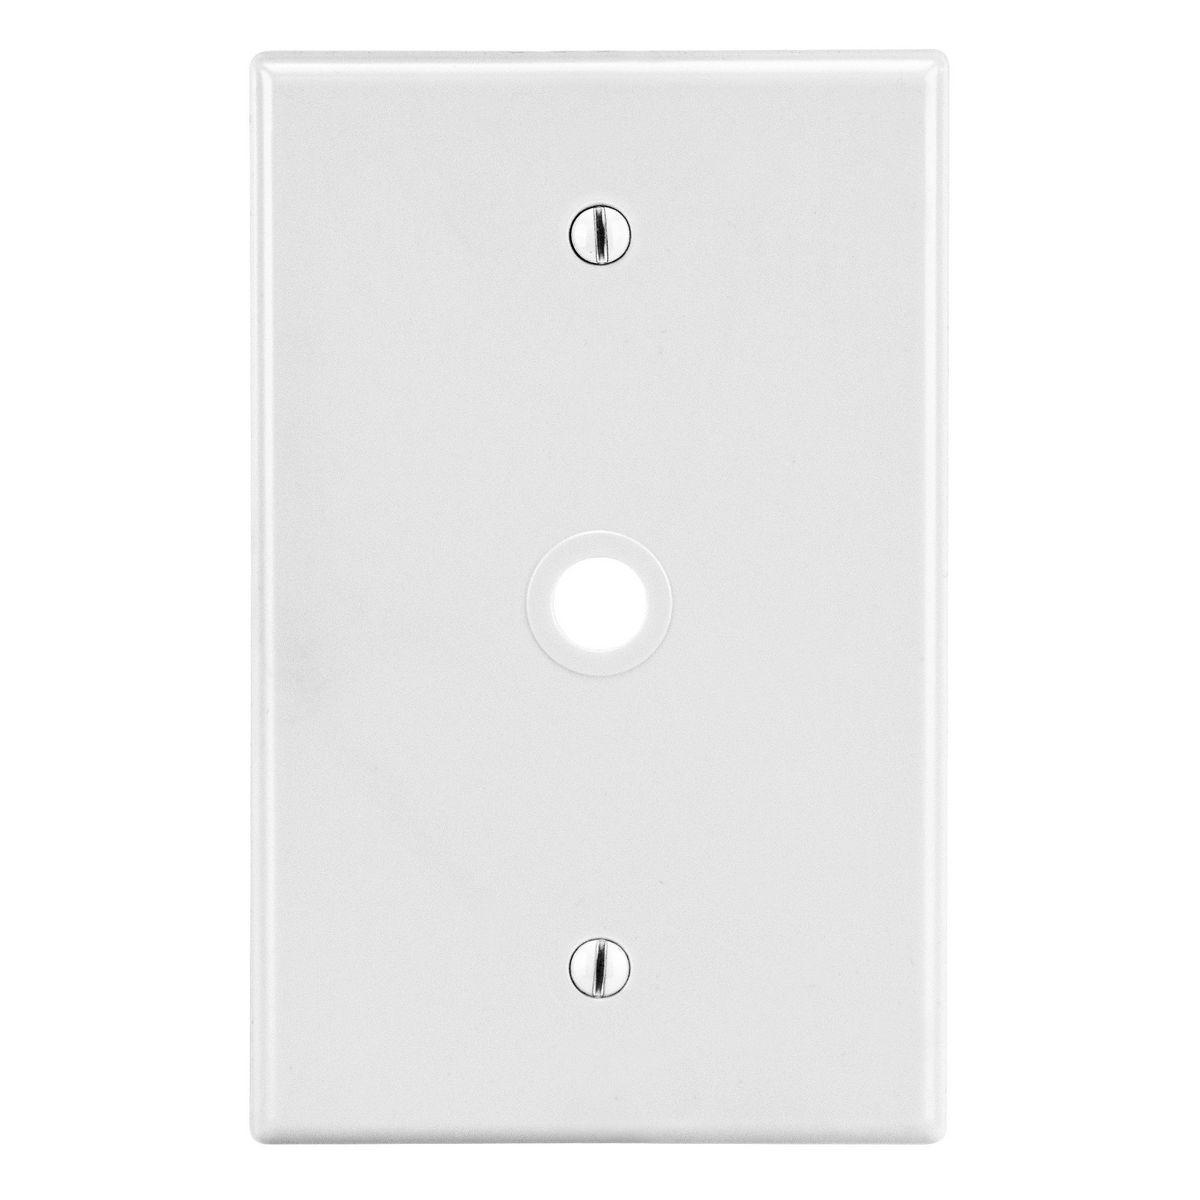 Hubbell PJ11W Wallplate, Mid-Size 1-Gang, .406" Opening, Box Mount, White  ; High-impact, self-extinguishing polycarbonate material ; More Rigid ; Sharp lines and less dimpling ; Smooth satin finish ; Blends into wall with an optimum finish ; Smooth Satin Finish